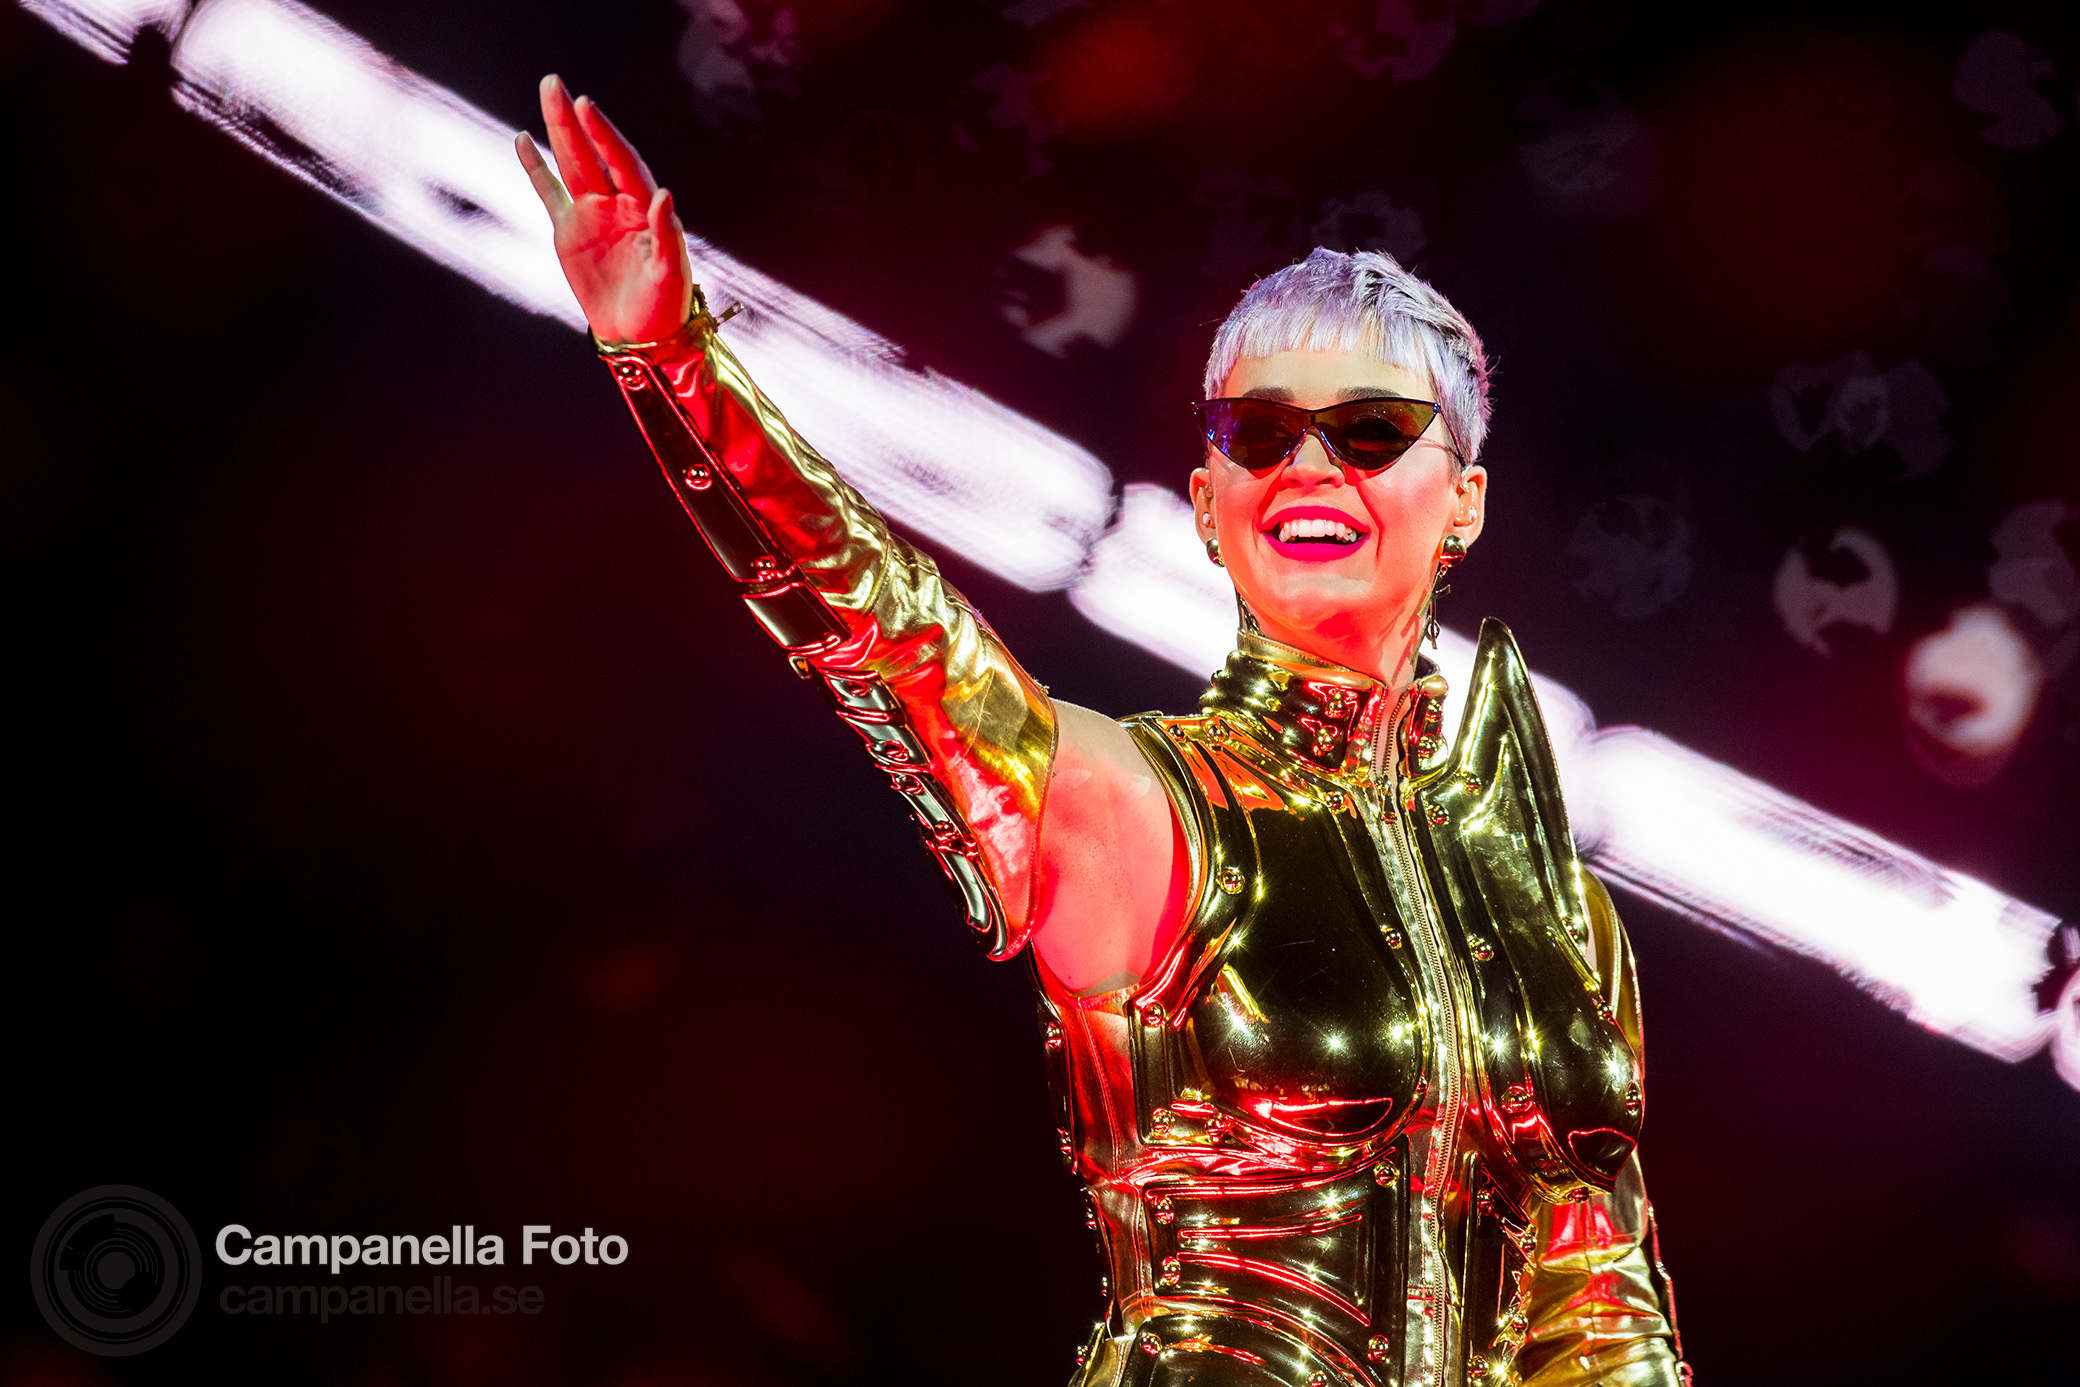 Katy Perry performs in Stockholm - Michael Campanella Photography